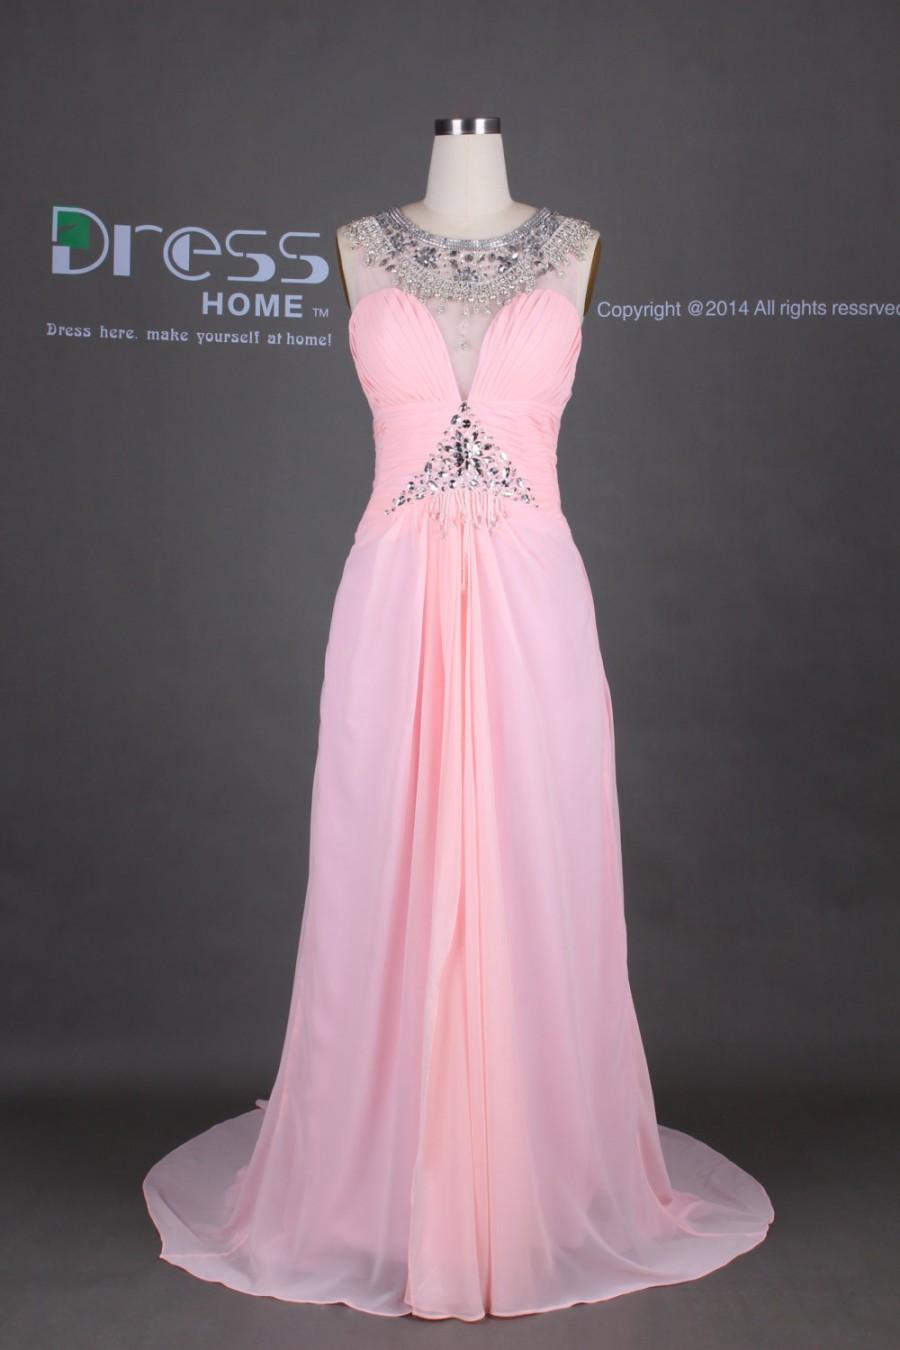 Wedding - Pink Round Neck Beading Long Prom Dress/See Through Open Back Chiffon Prom Dress/Sexy Long Party Dress/Evening Gown/Prom Dresses DH371